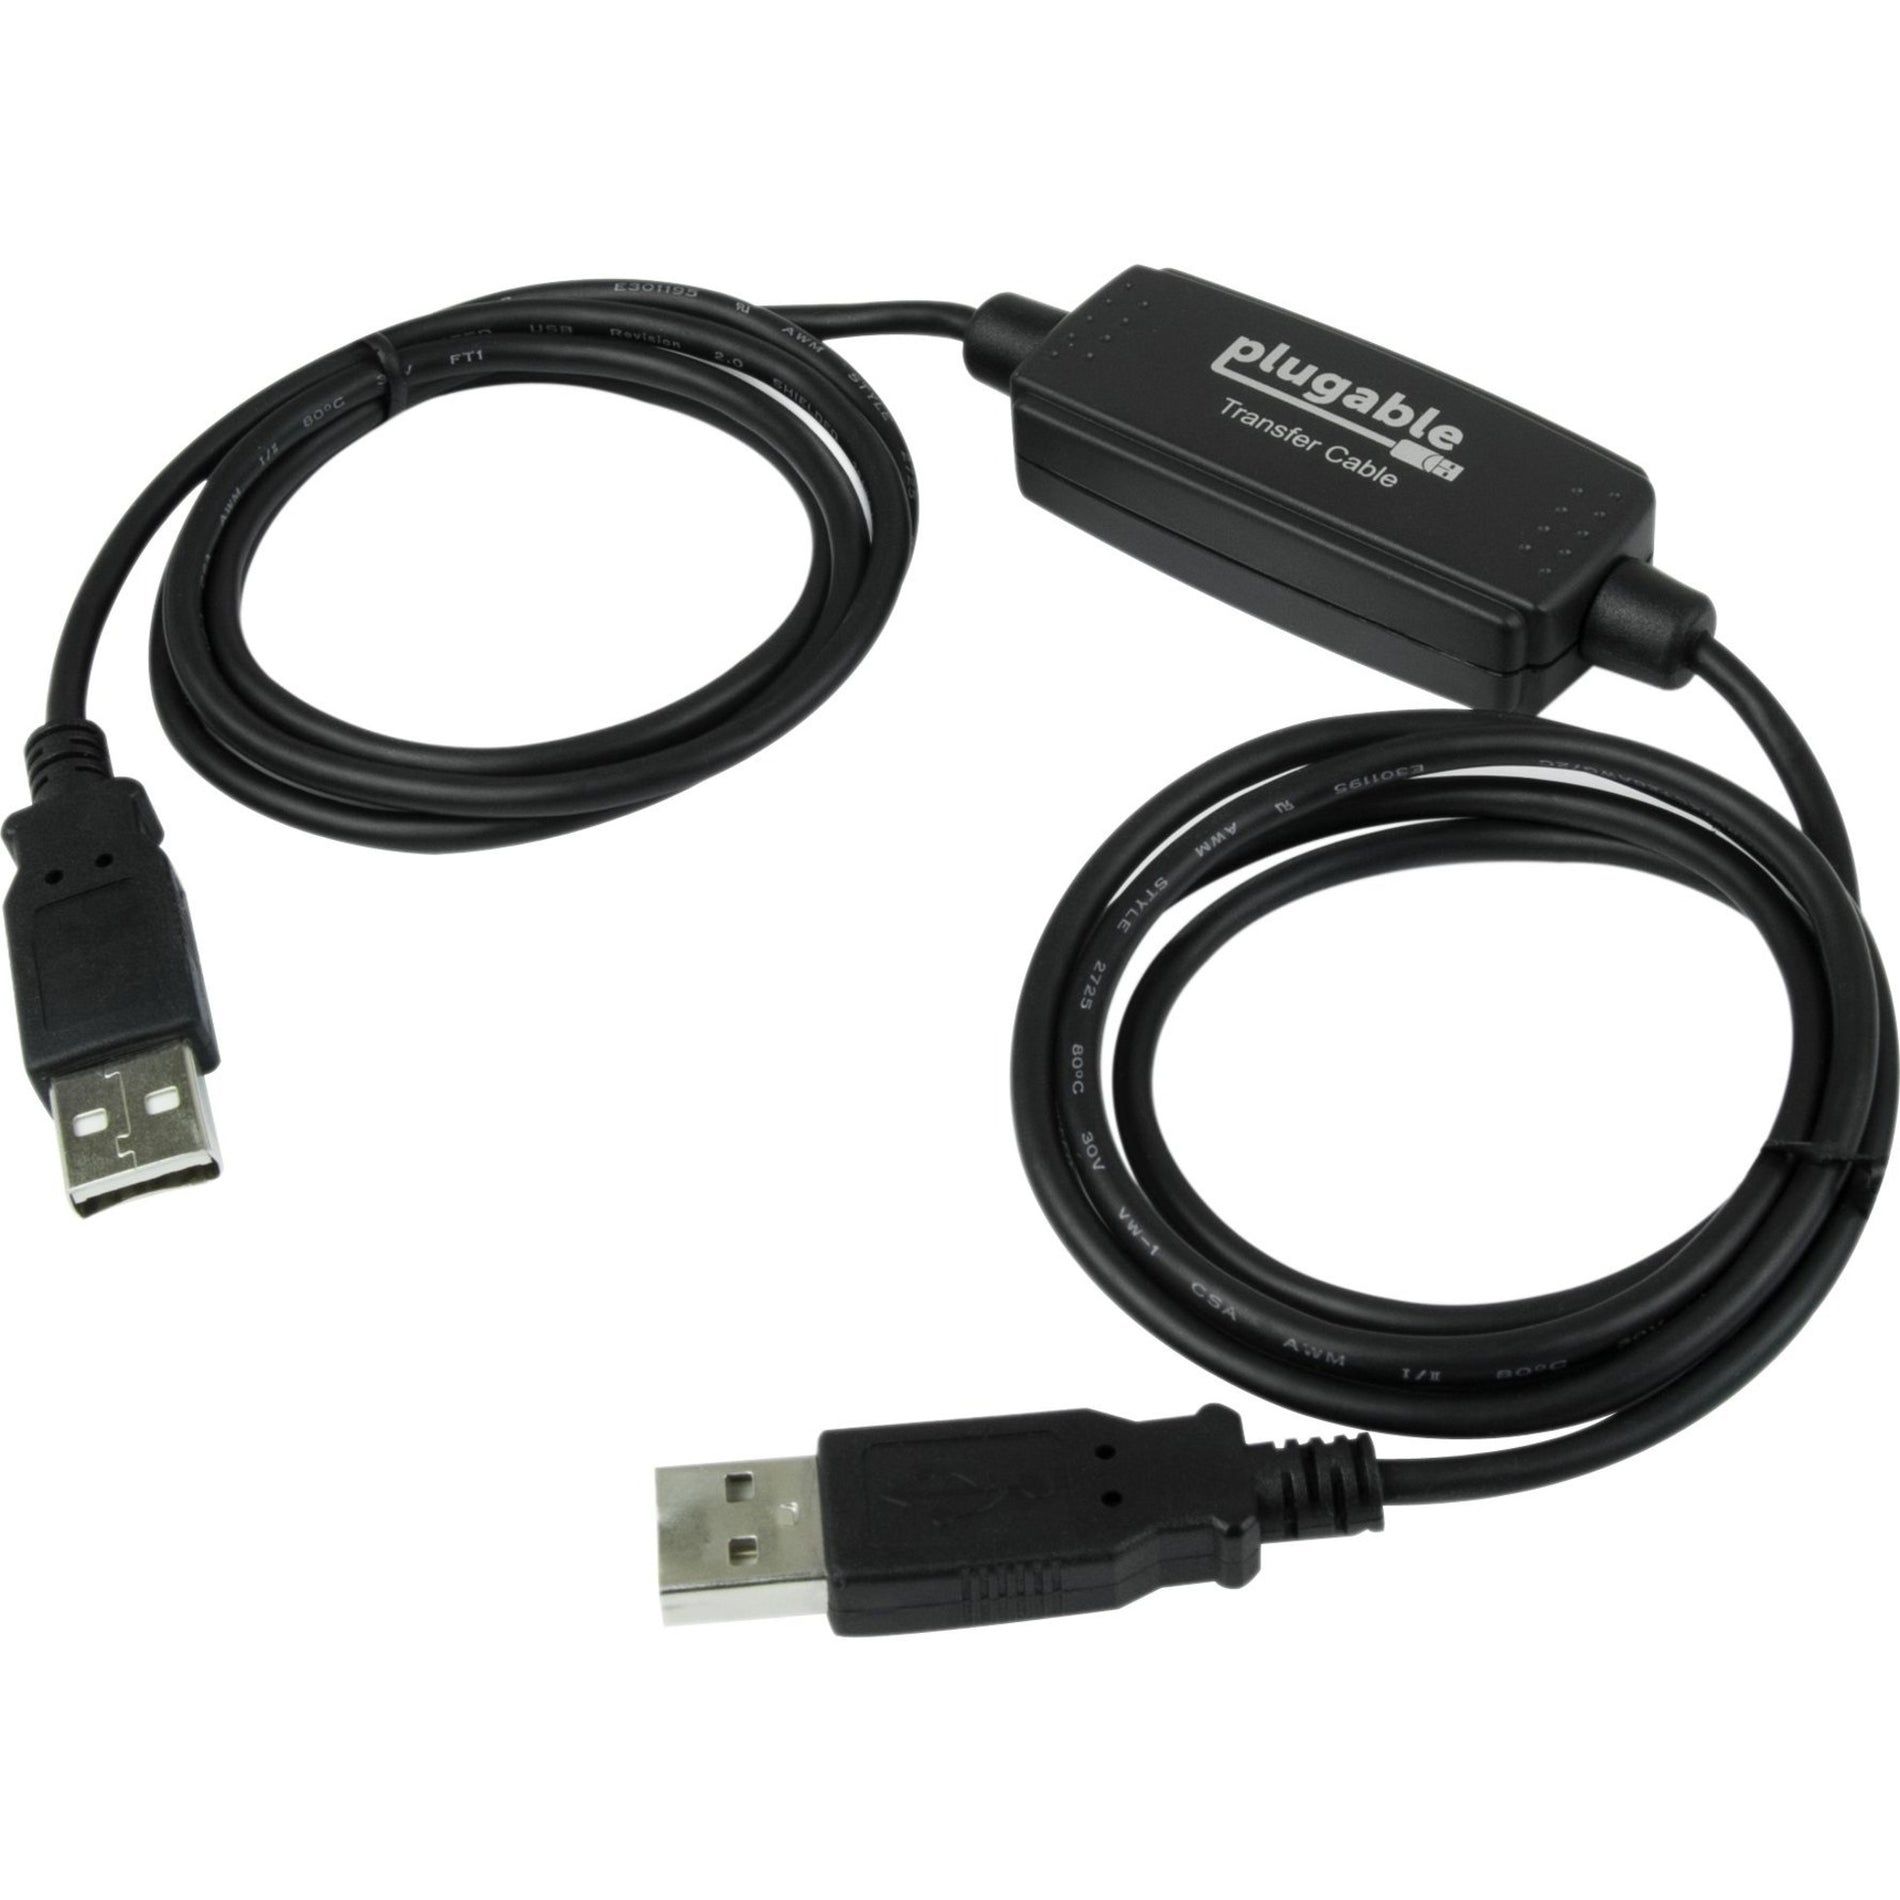 Plugable USB-EASY-TRAN USB 2.0 Windows Transfer Cable, Unlimited Use, Easy Data Transfer Between 2 PCs